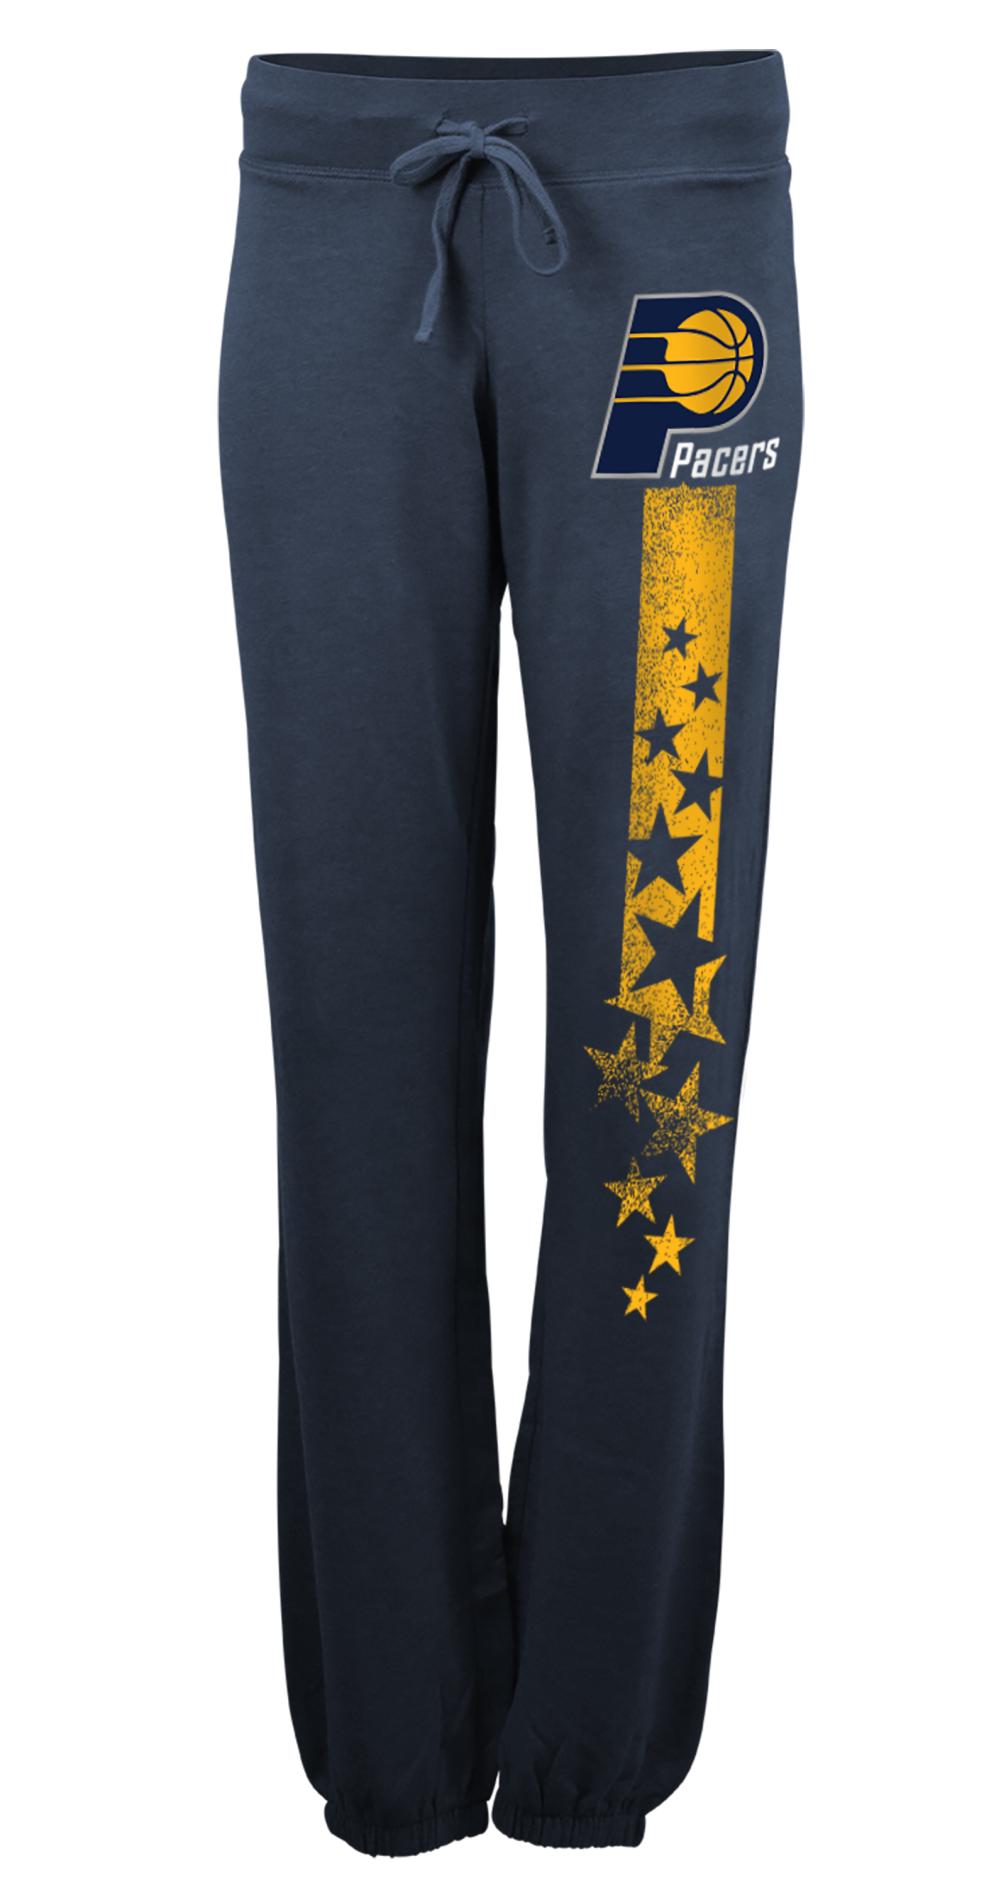 NBA(CANONICAL) Women's Sweatpants - Indiana Pacers